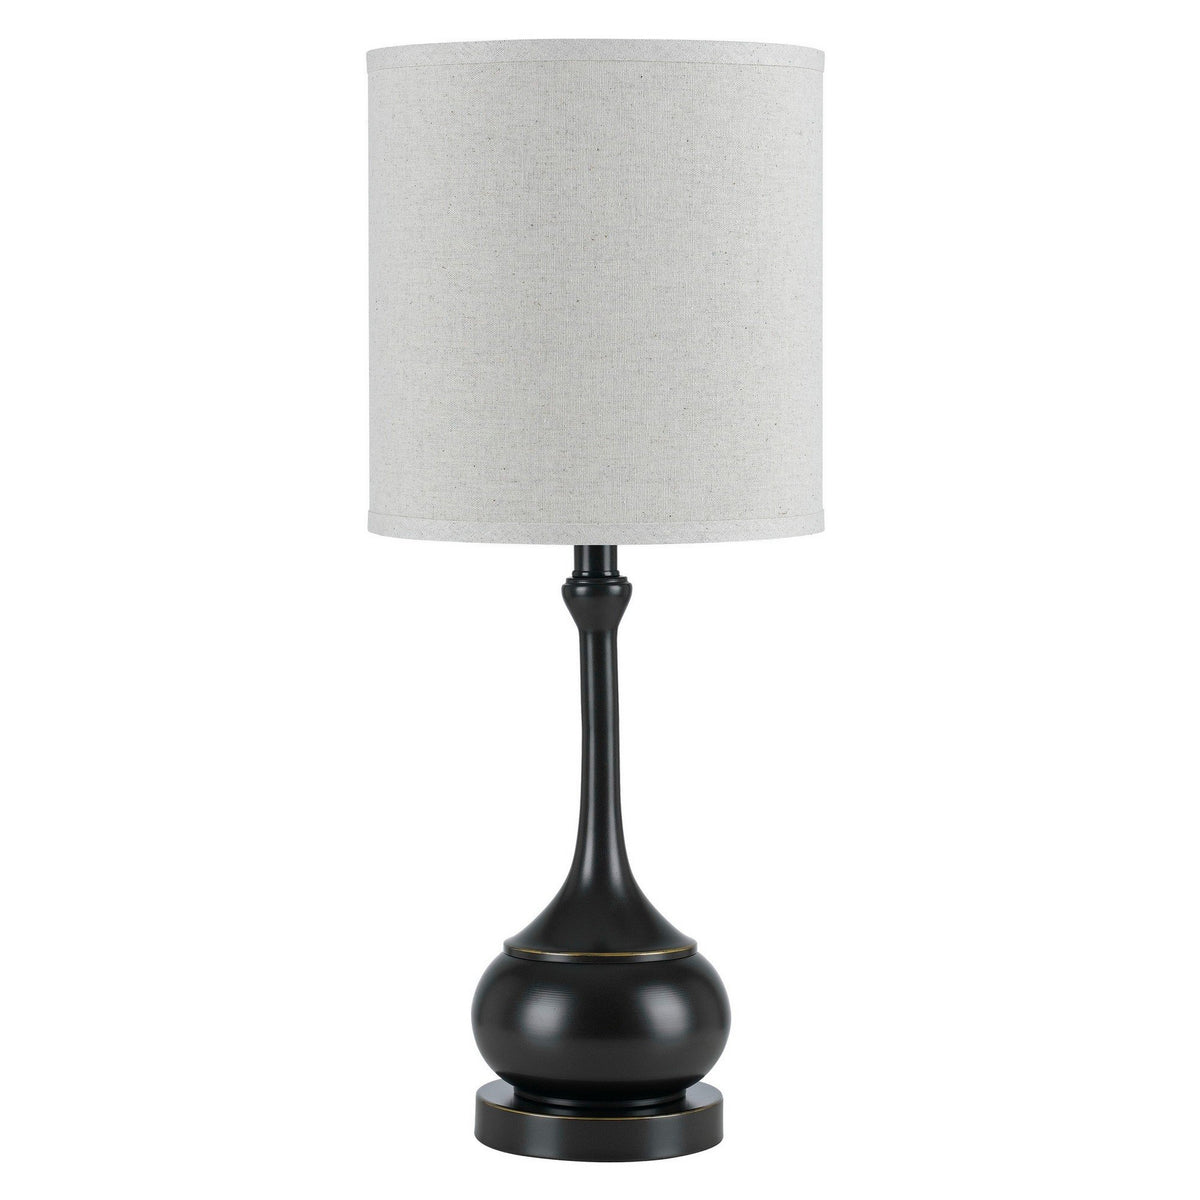 Elongated Bellied Shape Metal Accent Lamp with Drum Shade, Black - BM224929